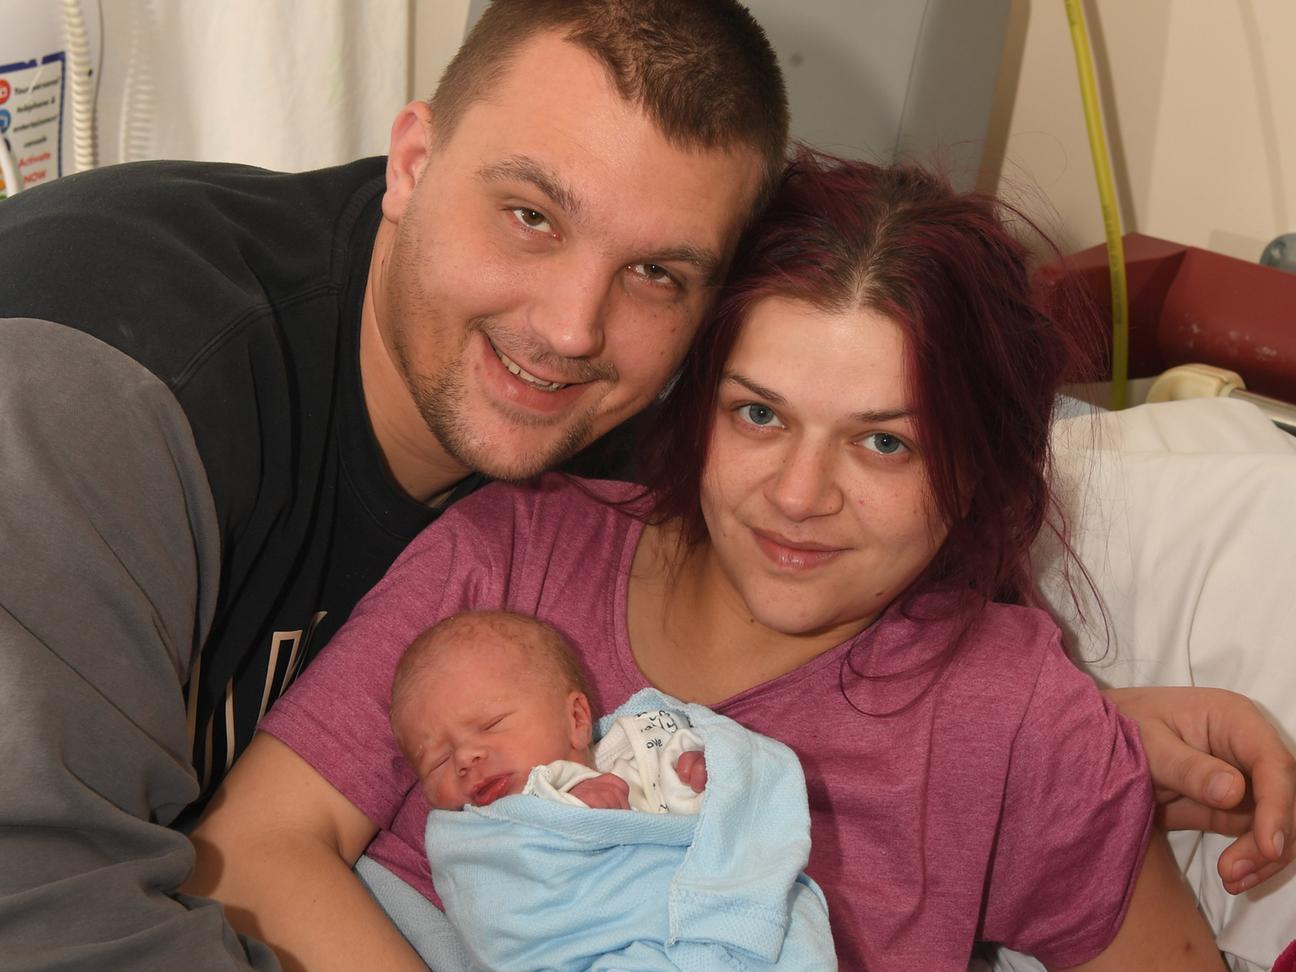 Tyrhys Swinbank was born at Royal Preston Hospital on November 17 at 7.43pm, weighing 4lb 11.5oz, to Stacey Khan and Richard Swinbank, from Deepdale